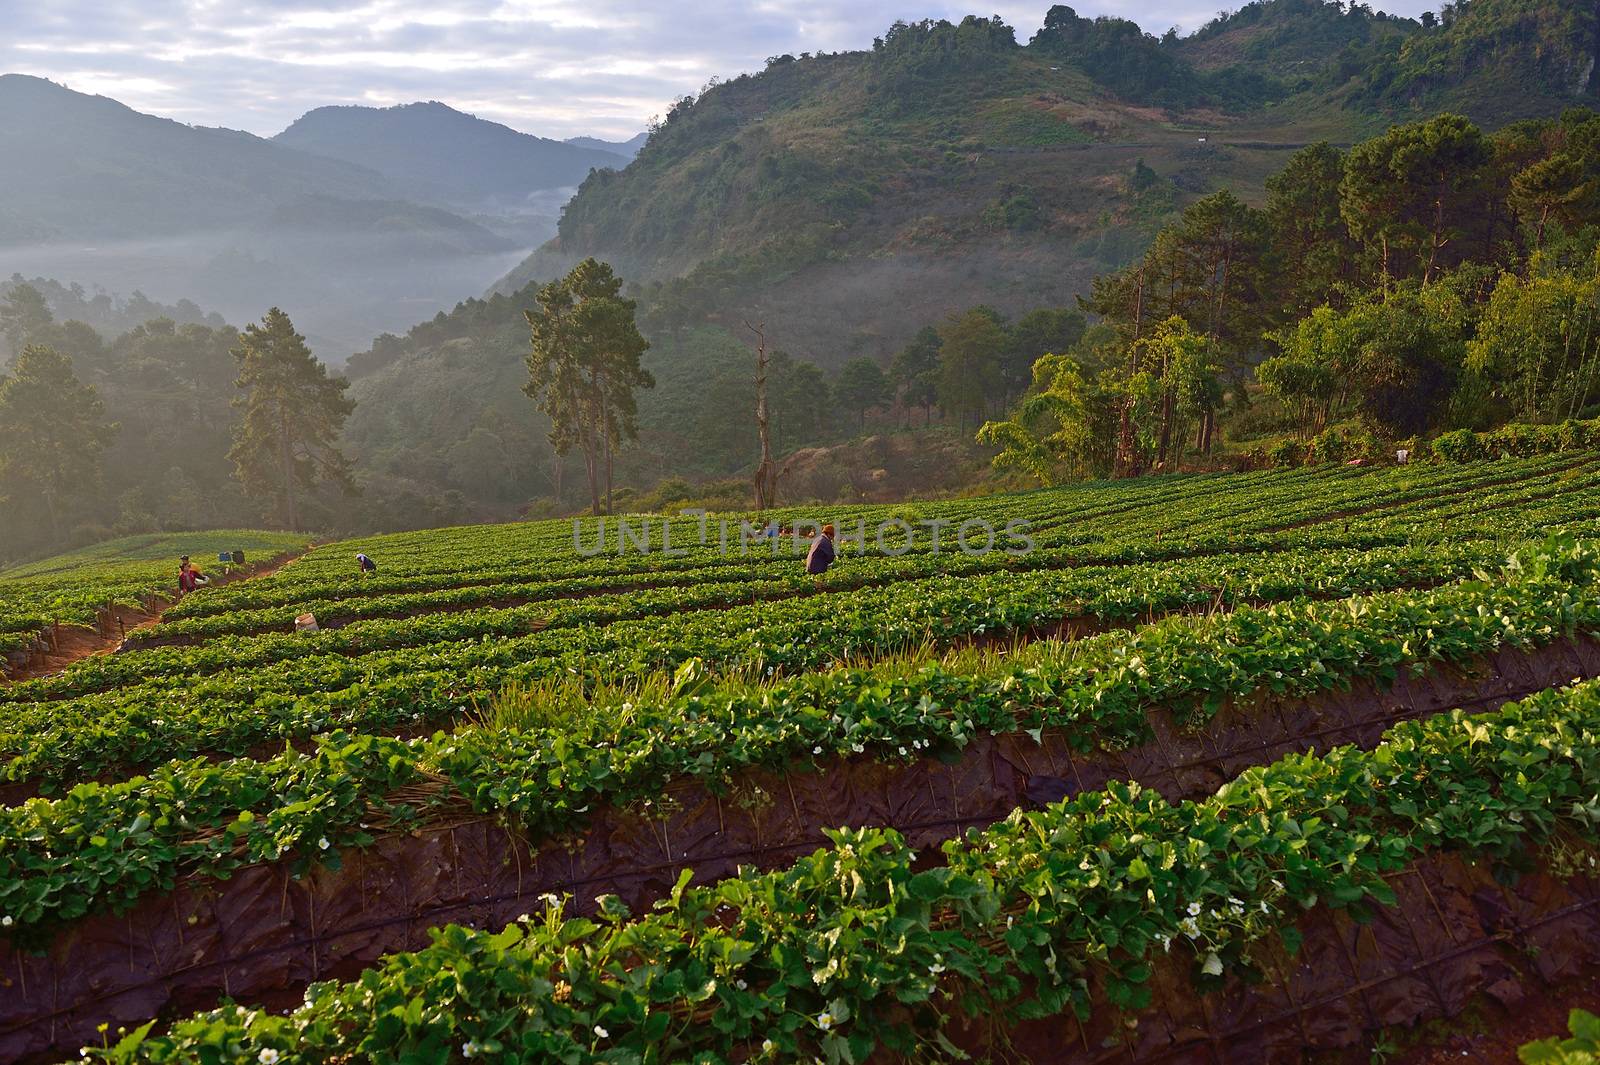 Strawberry farm at Doi angkhang , Chiangmai province by think4photop